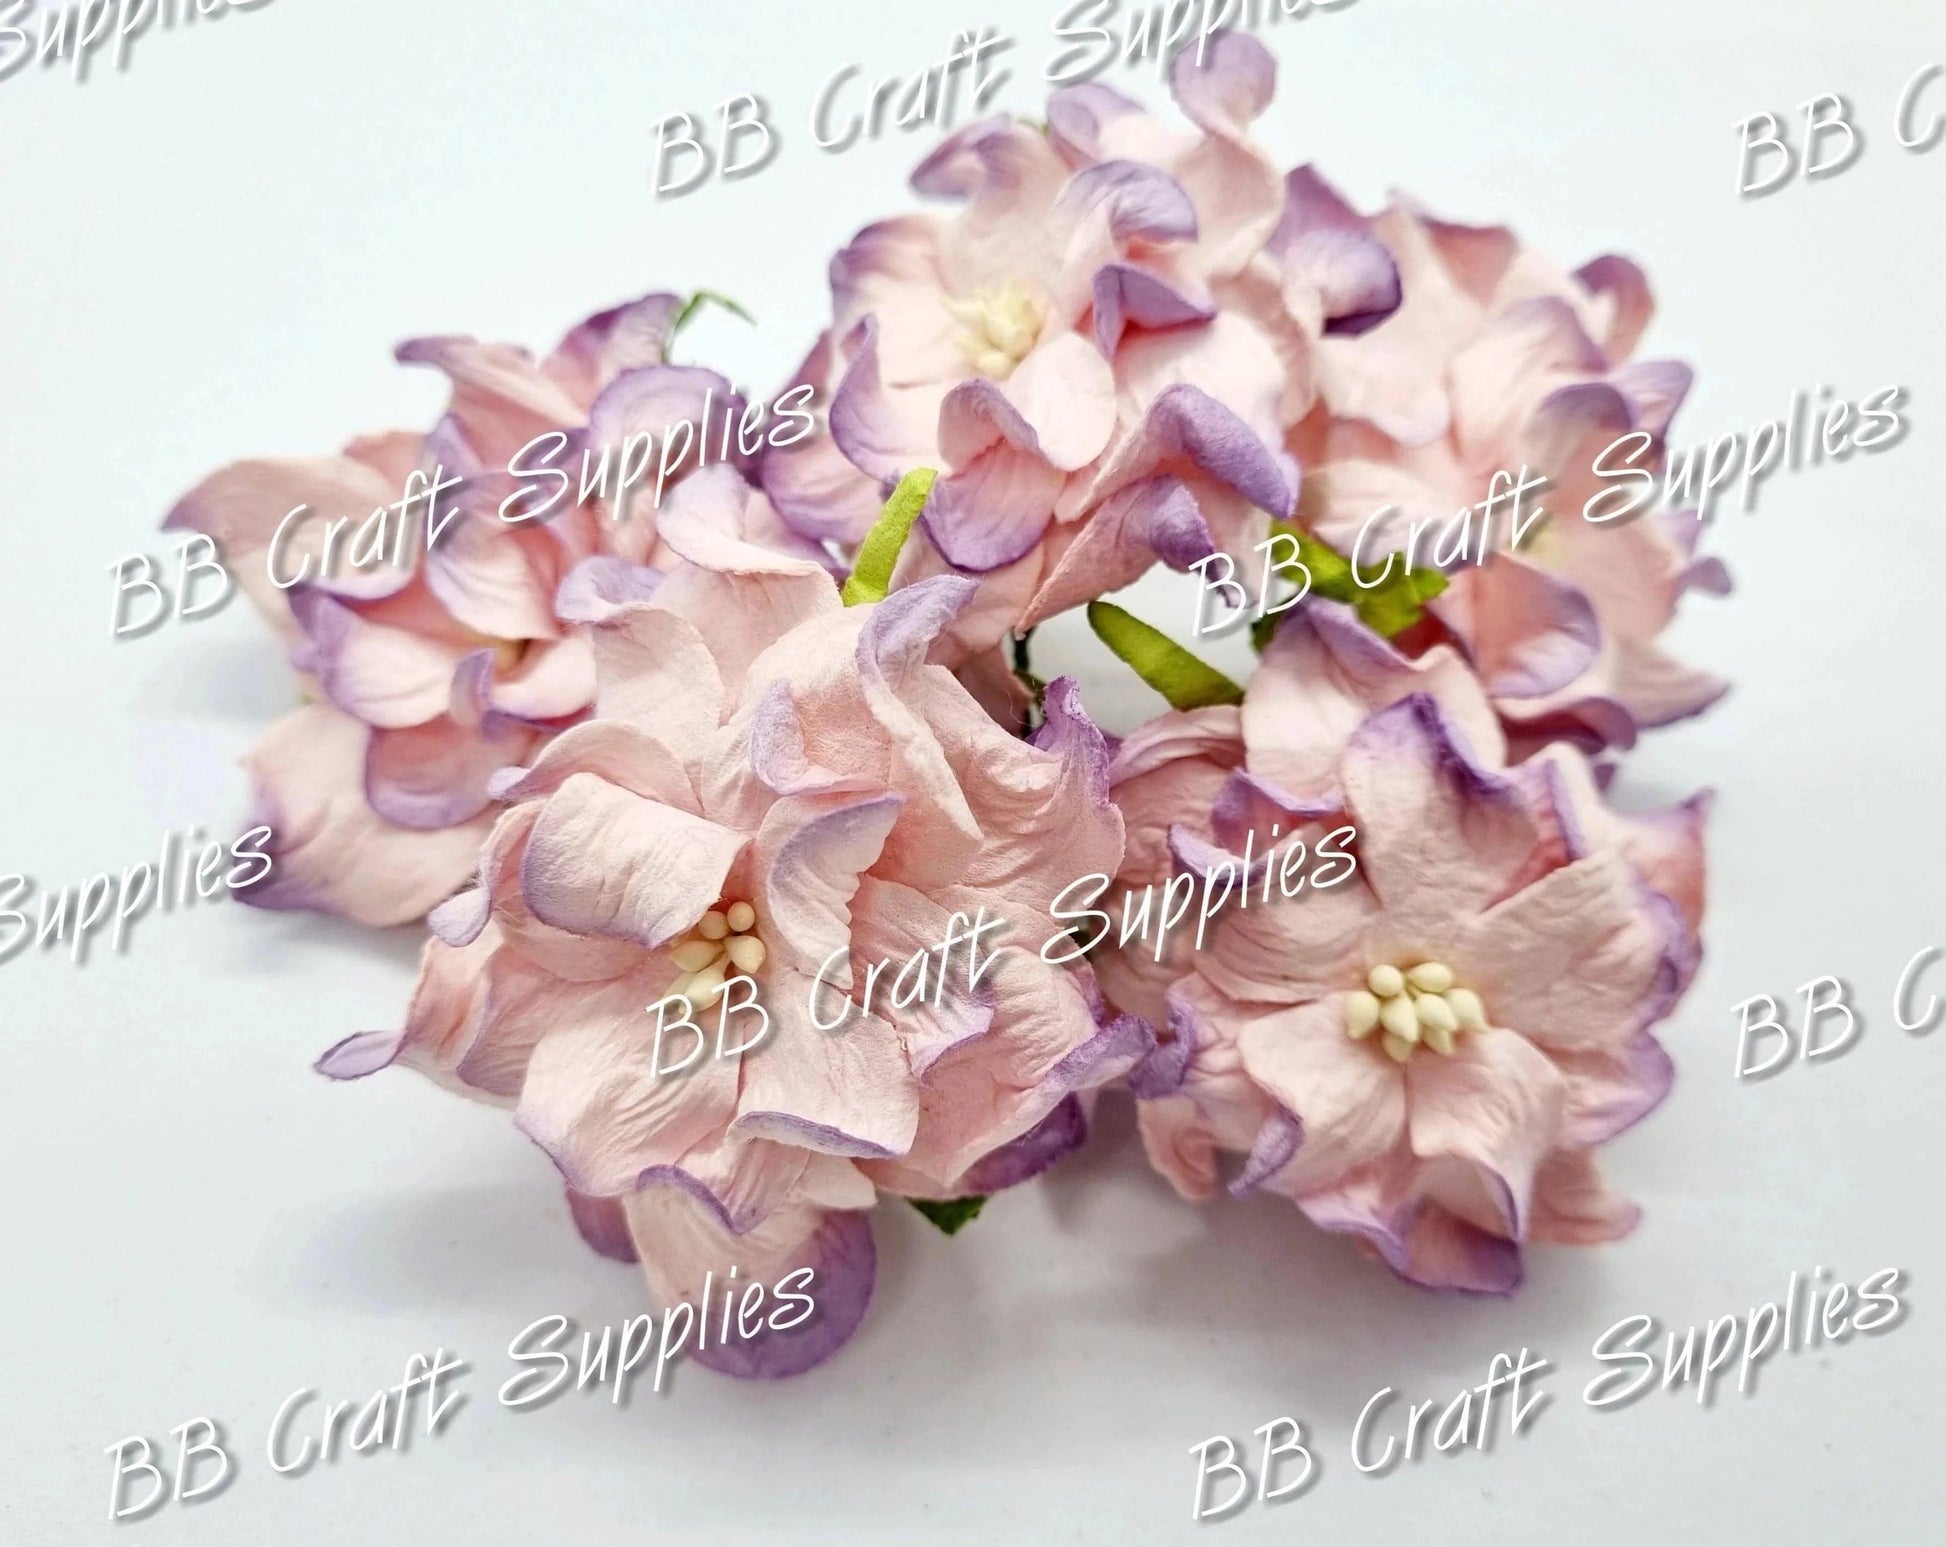 Gardenia Flowers light Pink/Purple tips 5 pack - Embelishment, Flower, Gardenia, Mulburry, mullbery, Pink - Bare Butler Faux Leather Supplies 